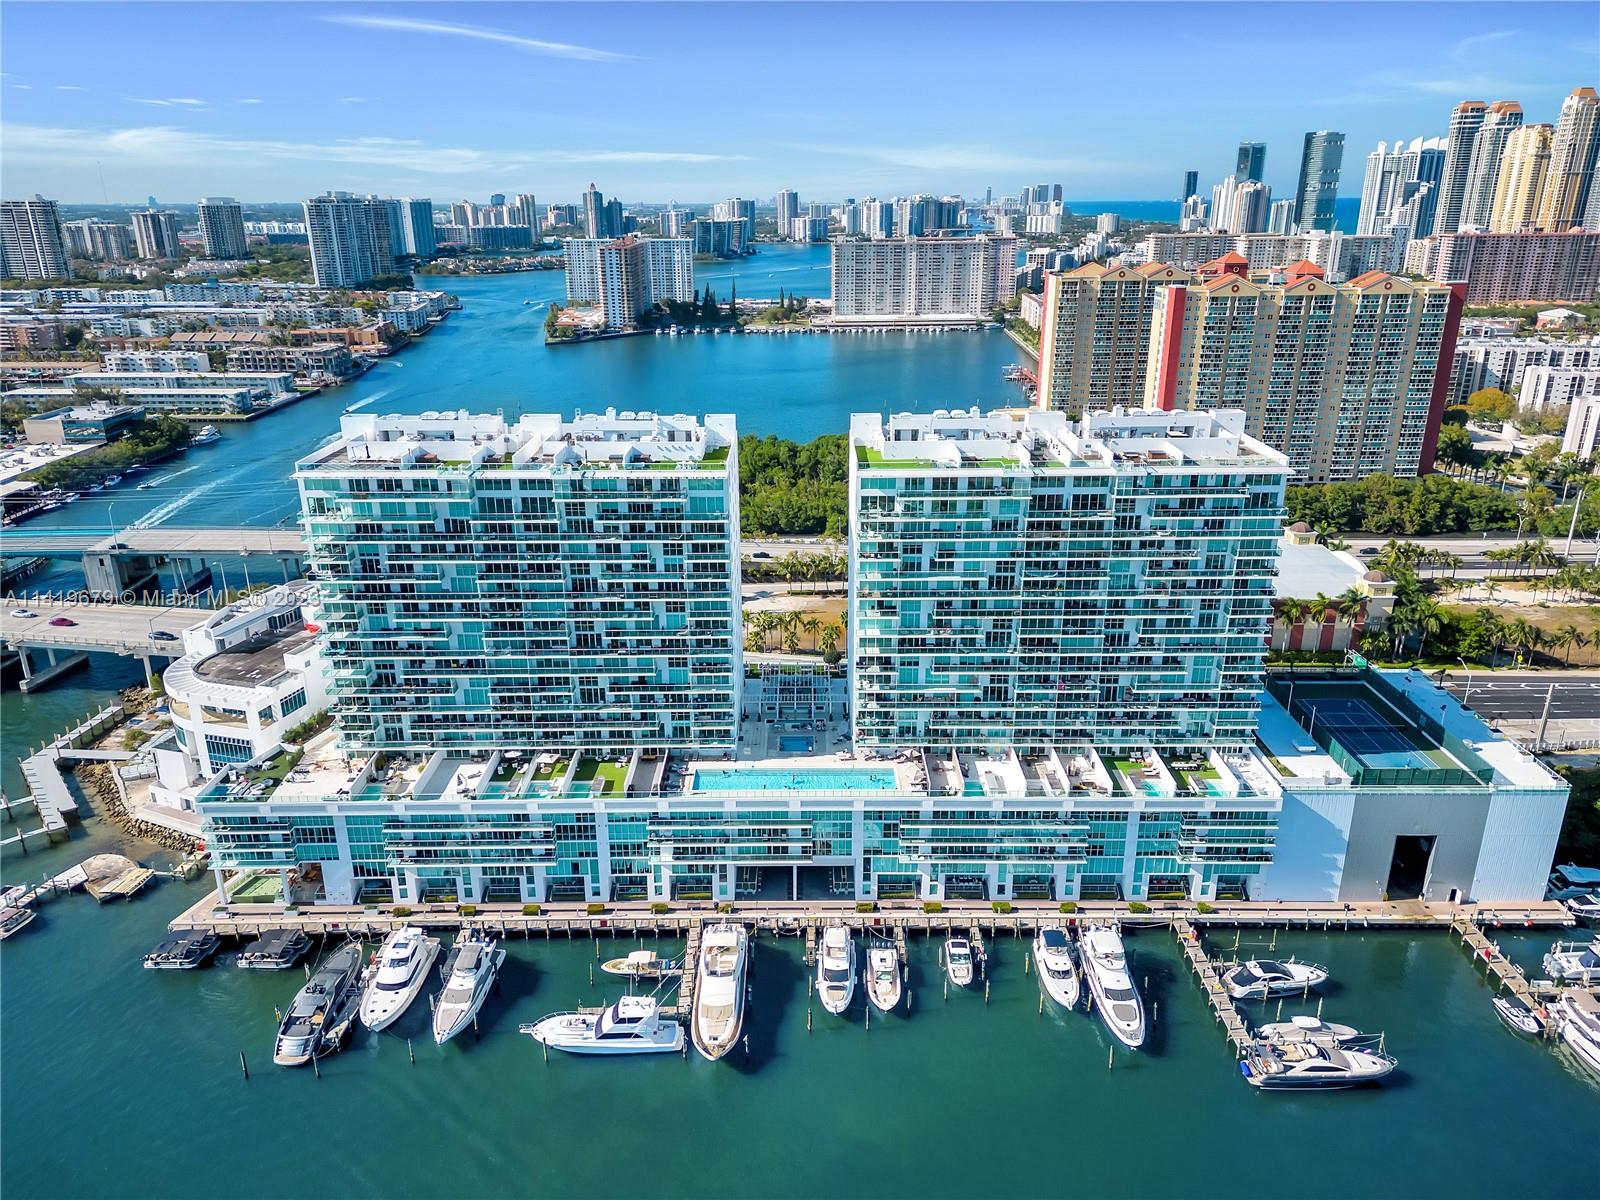 Spectacular corner unit- flow through floor plan, direct view to the bay and marina. 400 Sunny Isles offers a resort life style and features. a dry and wet marina, state of the art gym and spa, one clay tennis court, bay front pool,sauna, steam room, outside Jacuzzi, pool bar, full time concierge. The unit has Italian porcelain floors, Italian kitchen cabinets. and European appliances. MUST SEE. One of the best floor plans in the building and one of the best views!!